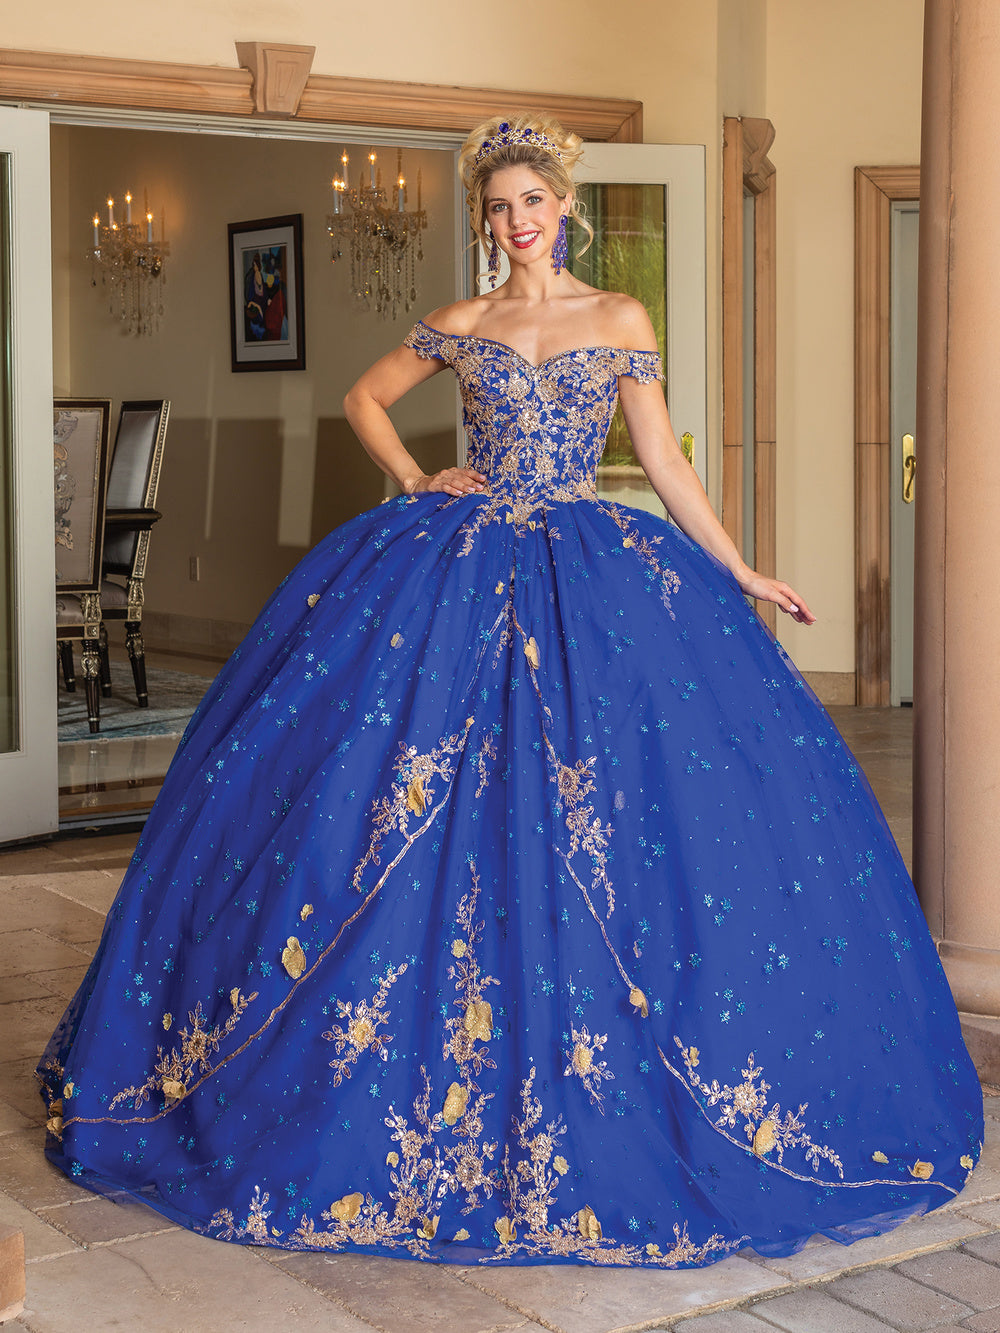 Dancing Queen Royal Blue w/ Gold Quineanera Dress